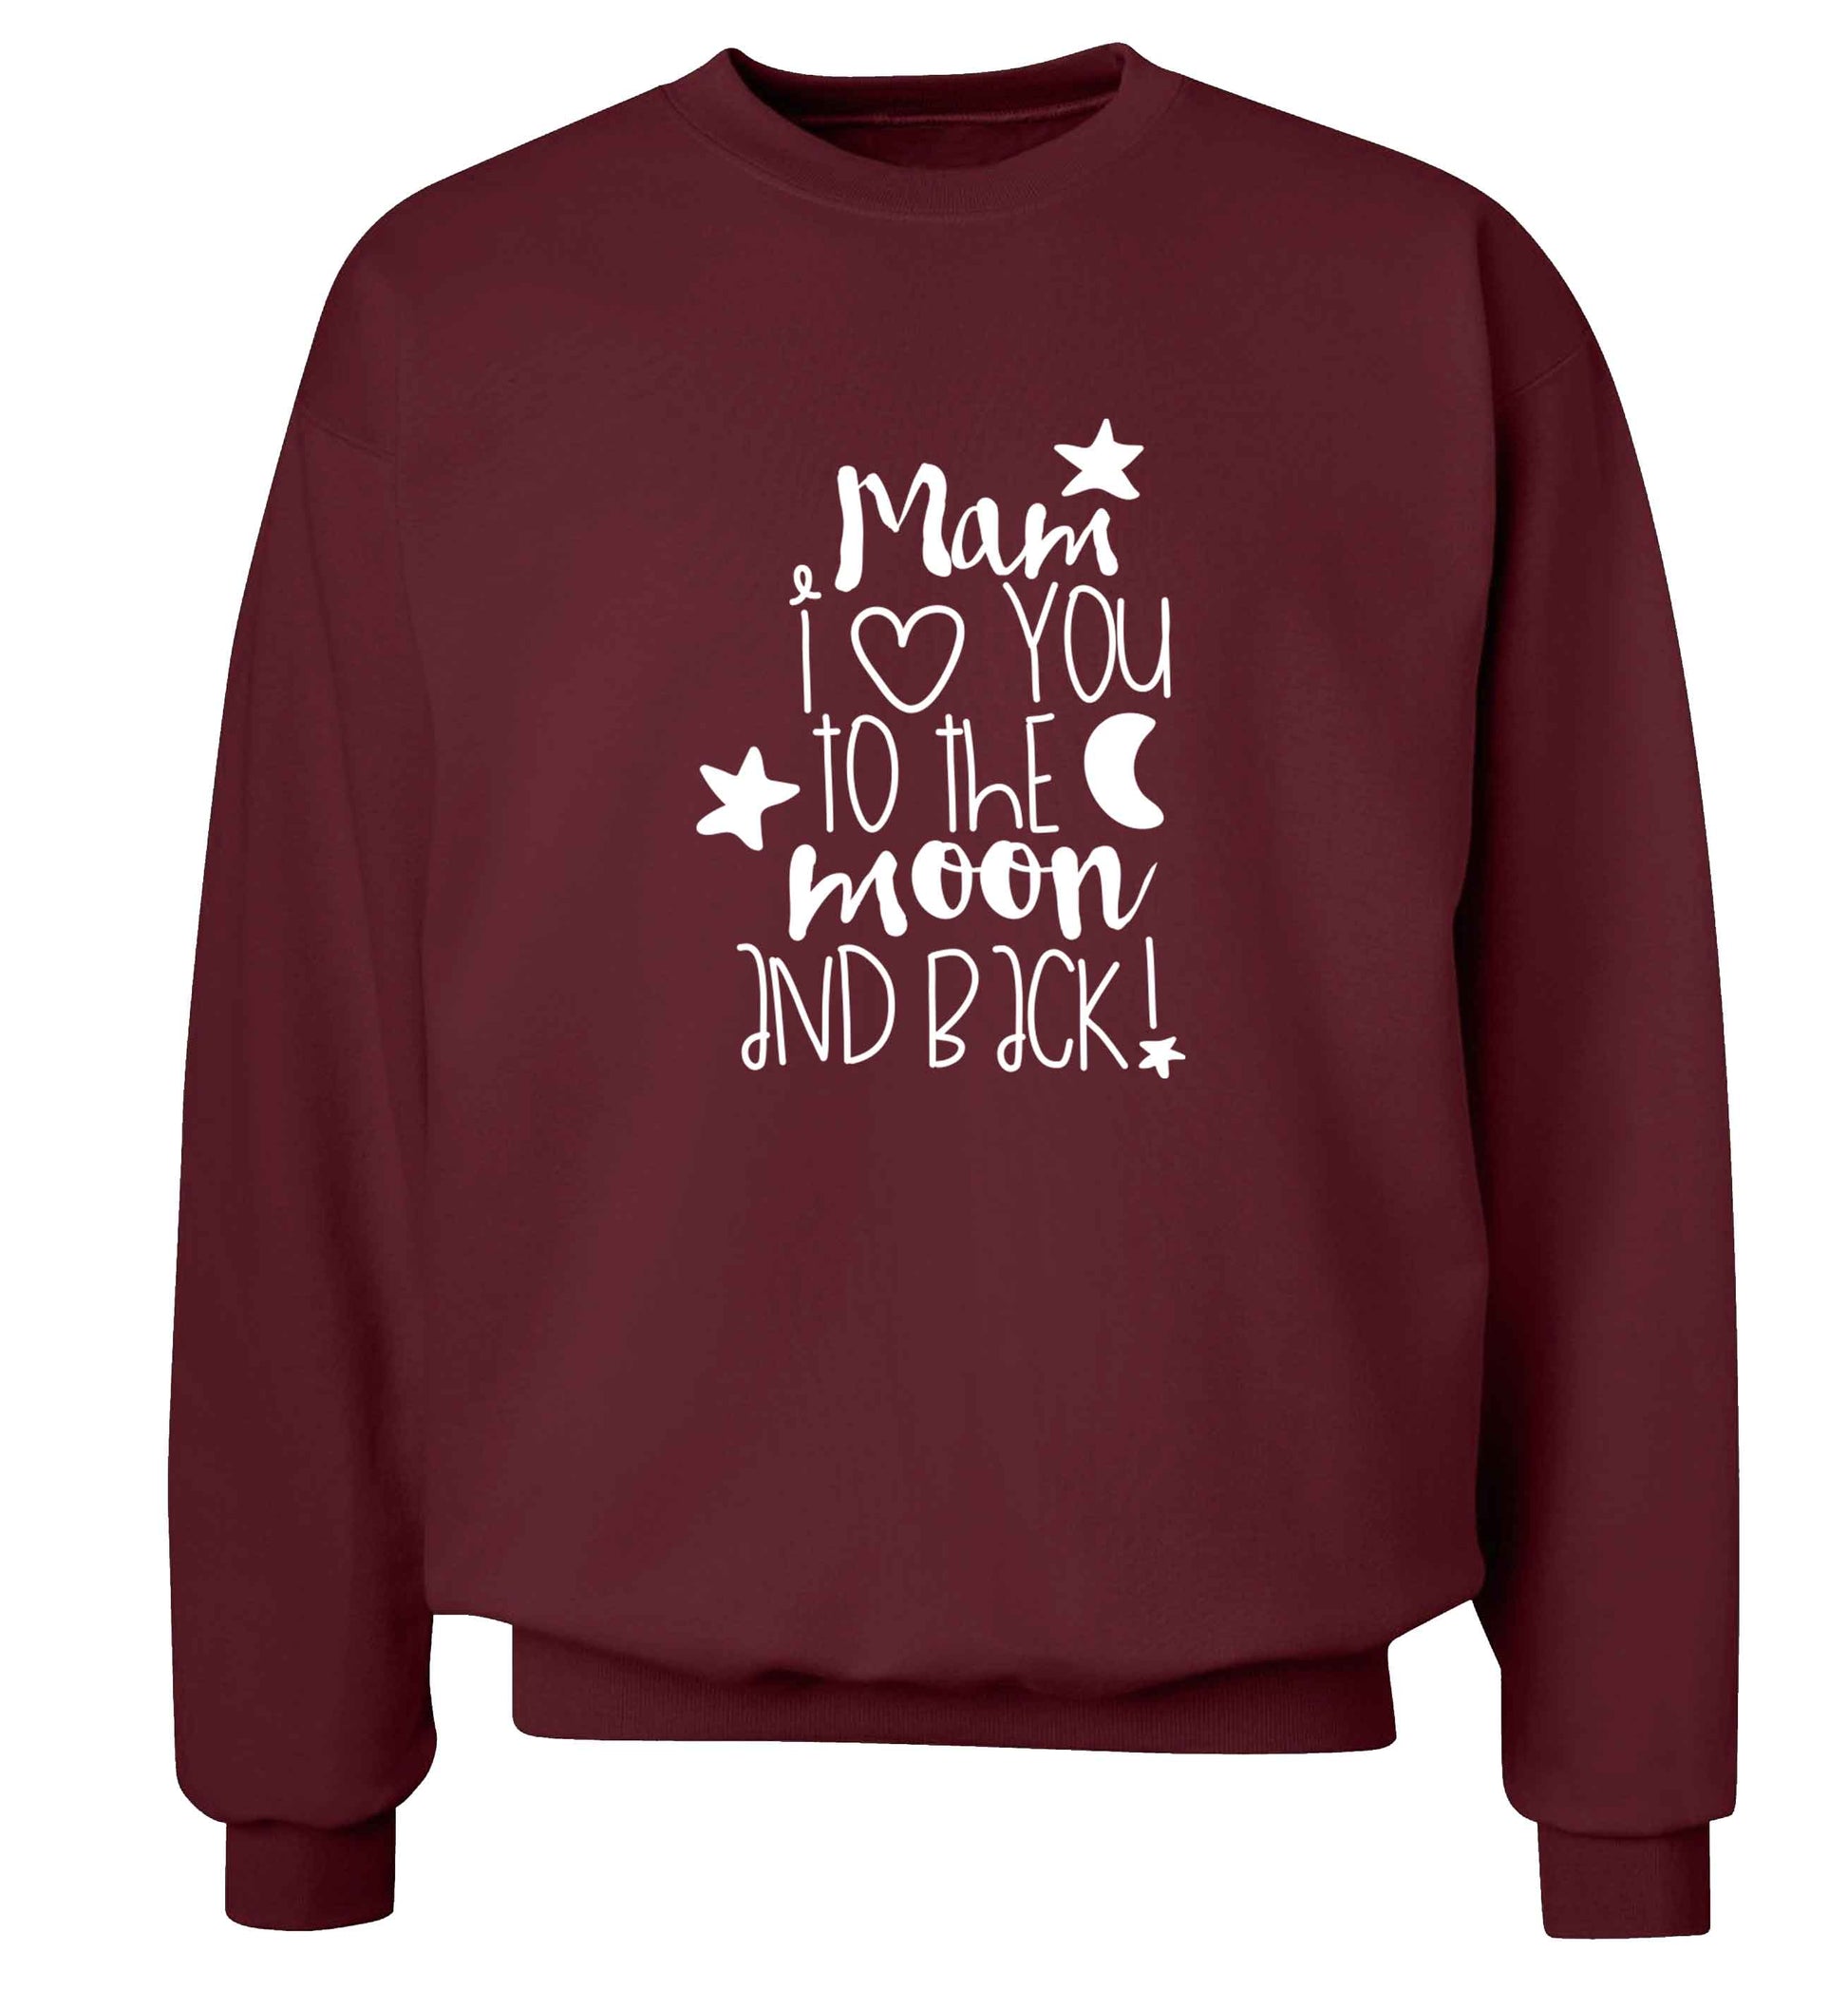 Mam I love you to the moon and back adult's unisex maroon sweater 2XL